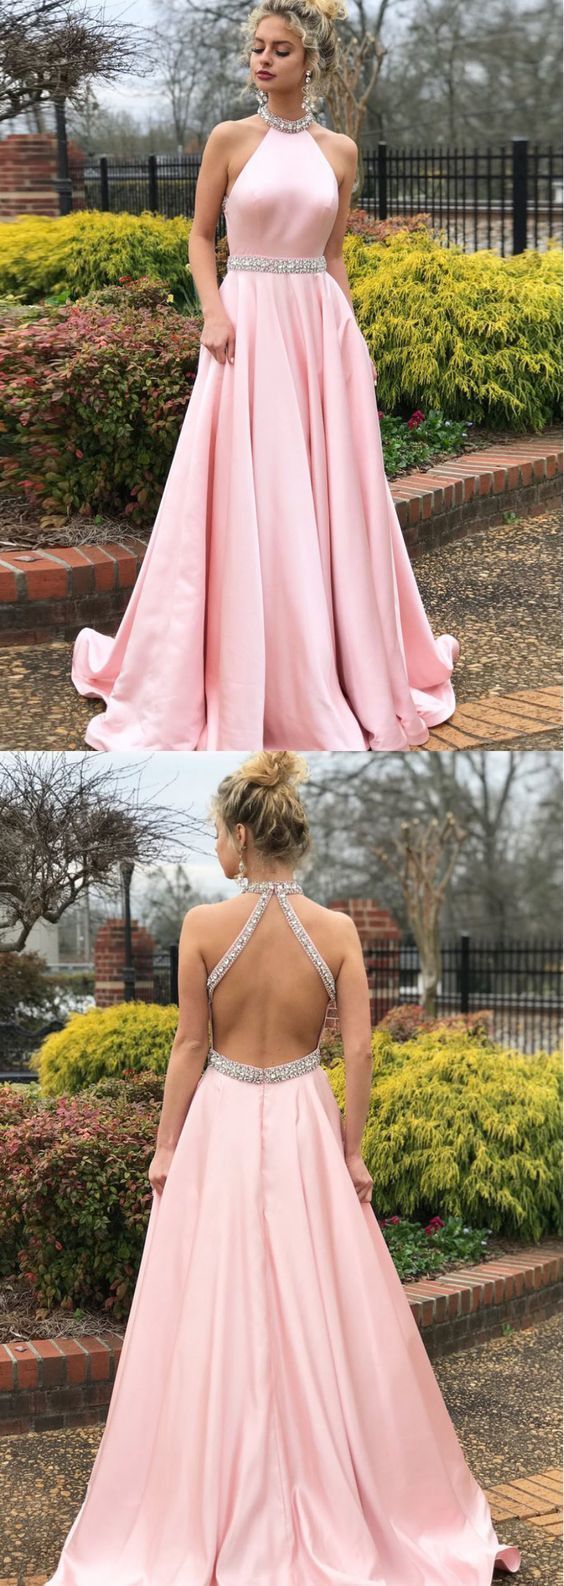 Simple A-line Prom Dresses Pink High Neck Cheap Beading Prom Dress/Evening Dress 2019